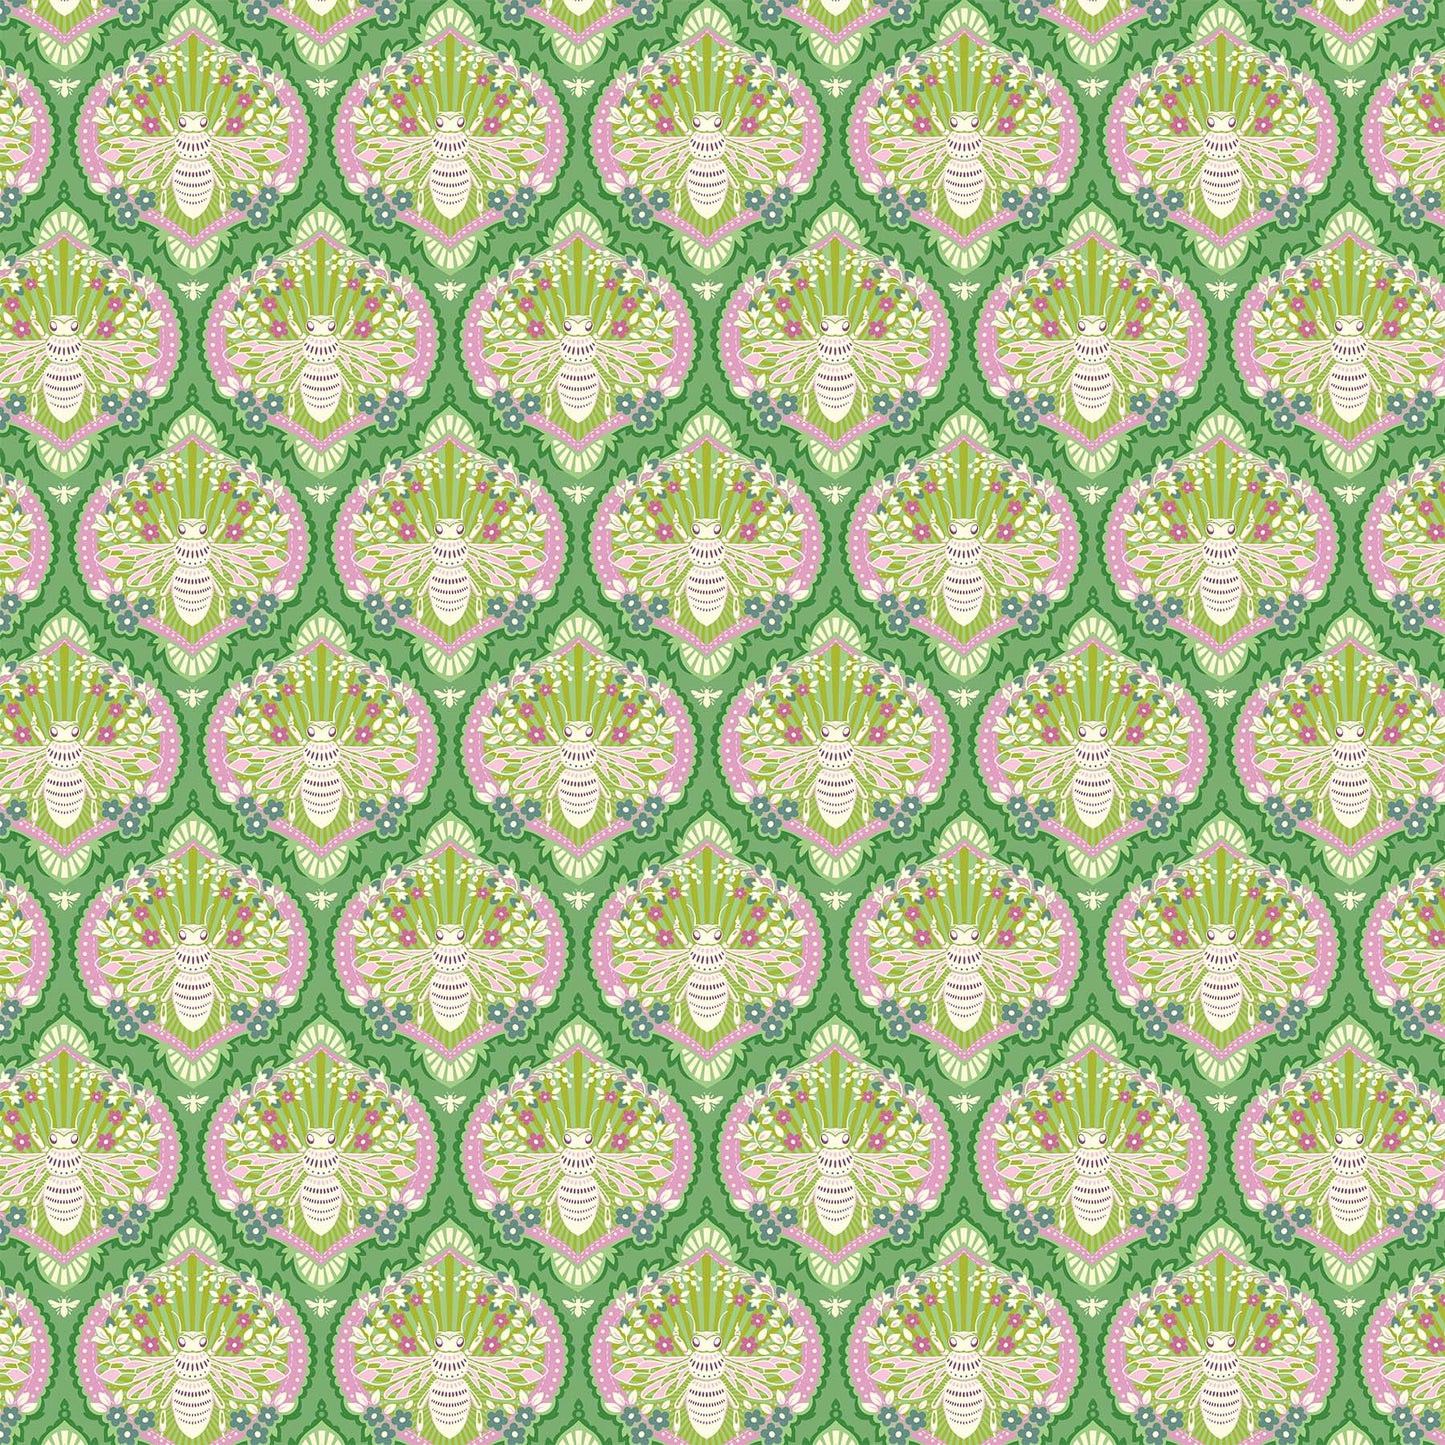 Local Honey by Heather Bailey - Local Honey Damask in Green